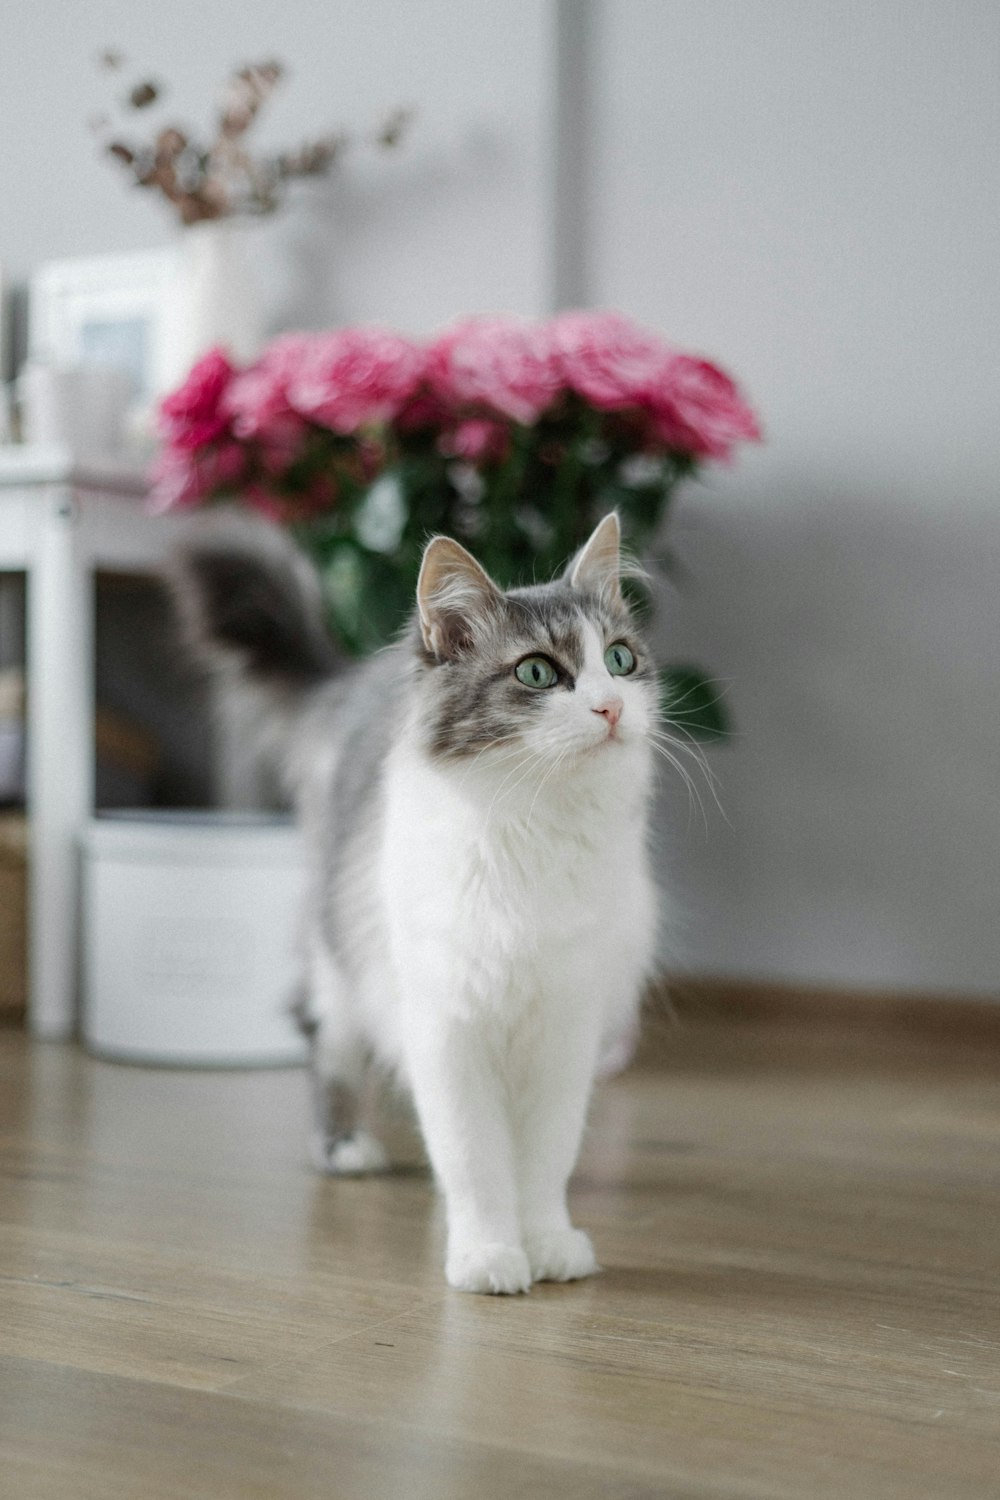 a grey and white cat standing on a hard wood floor